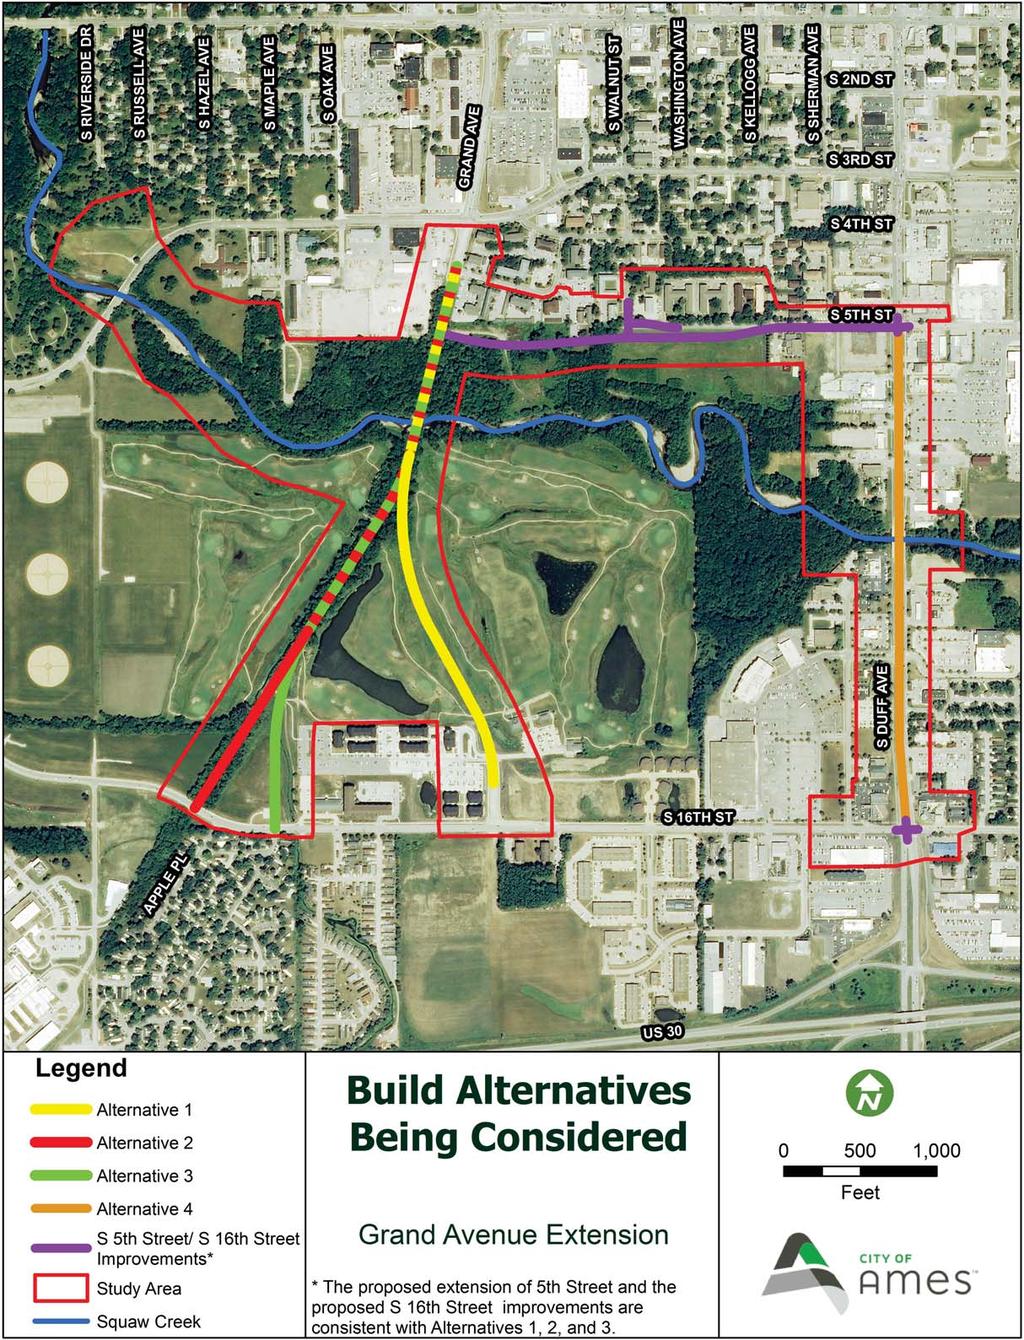 Four (4) alignments have been identified as potential Build Alternatives for the Grand Avenue Extension.